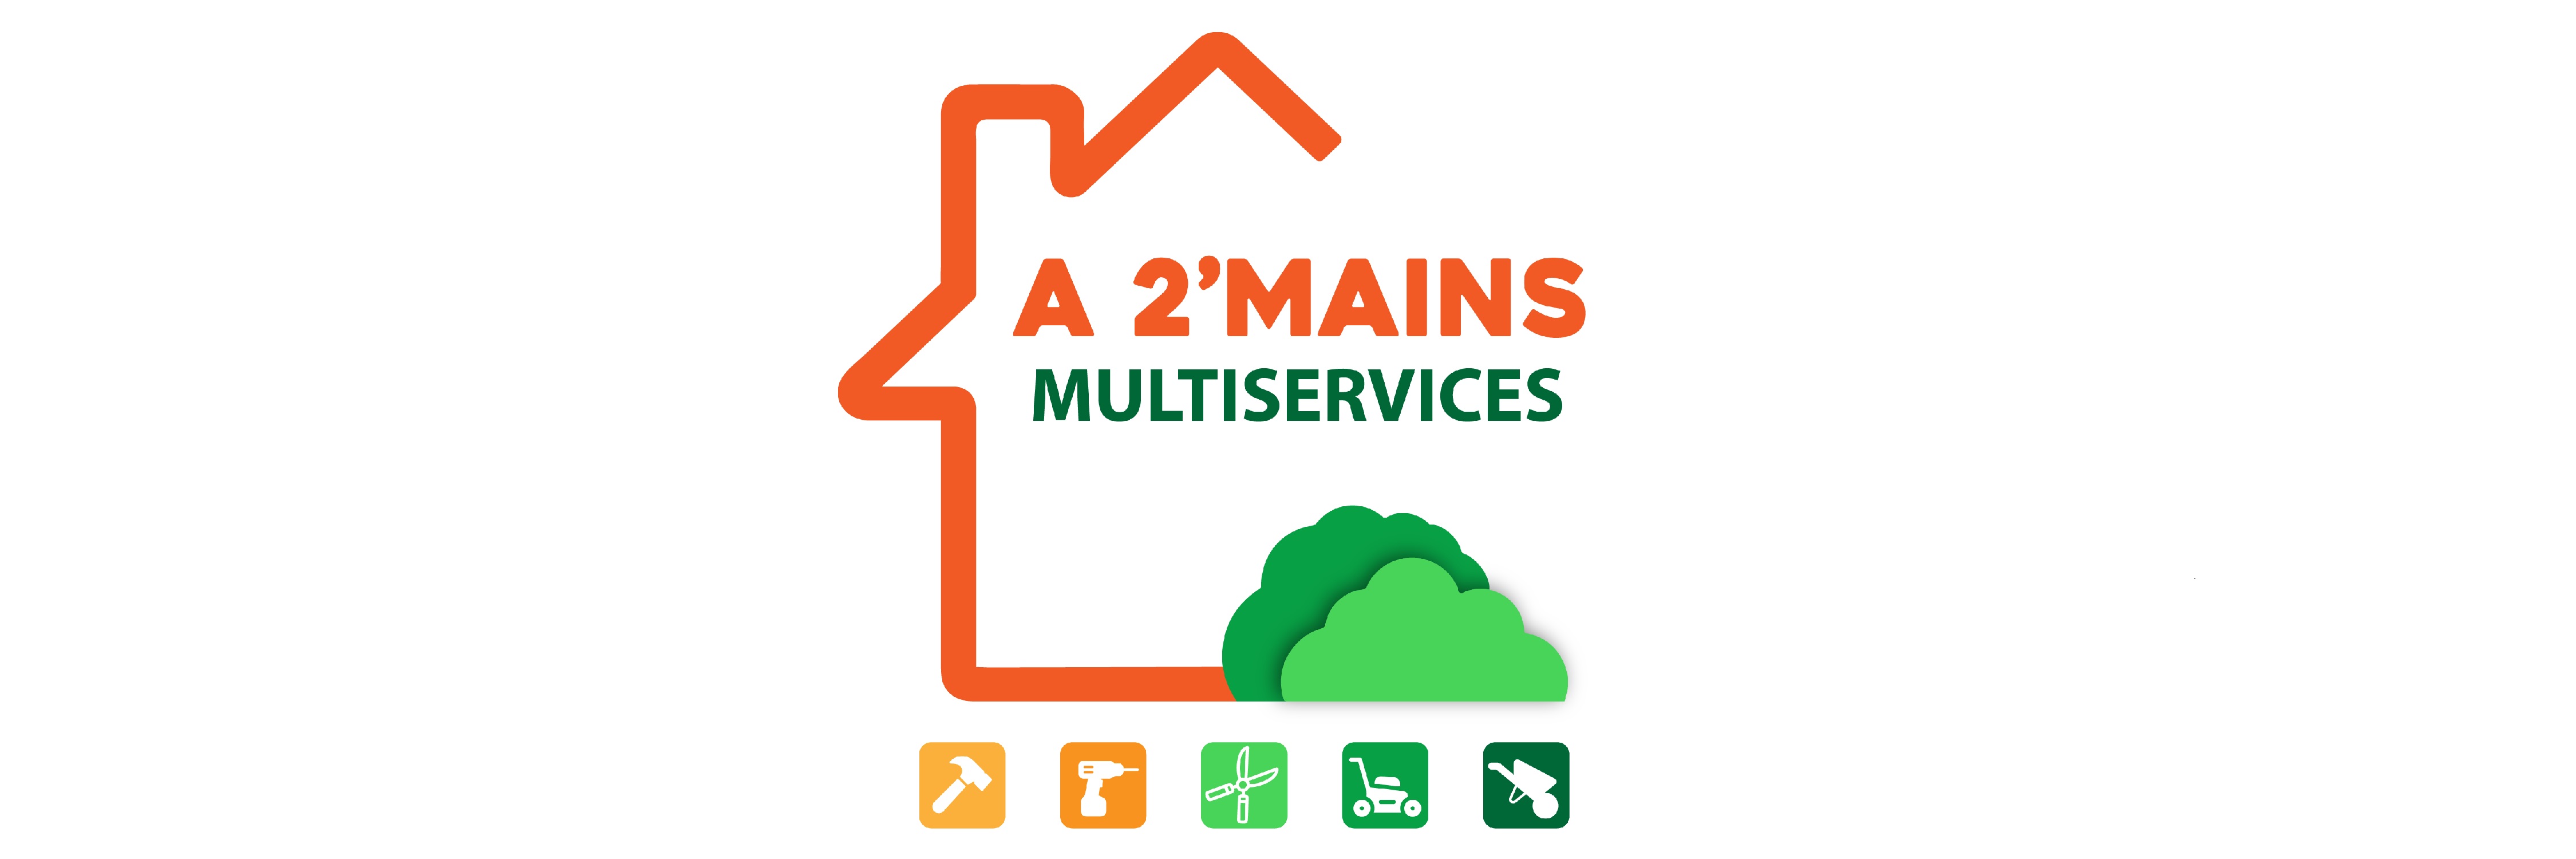 A 2 Mains Multiservices